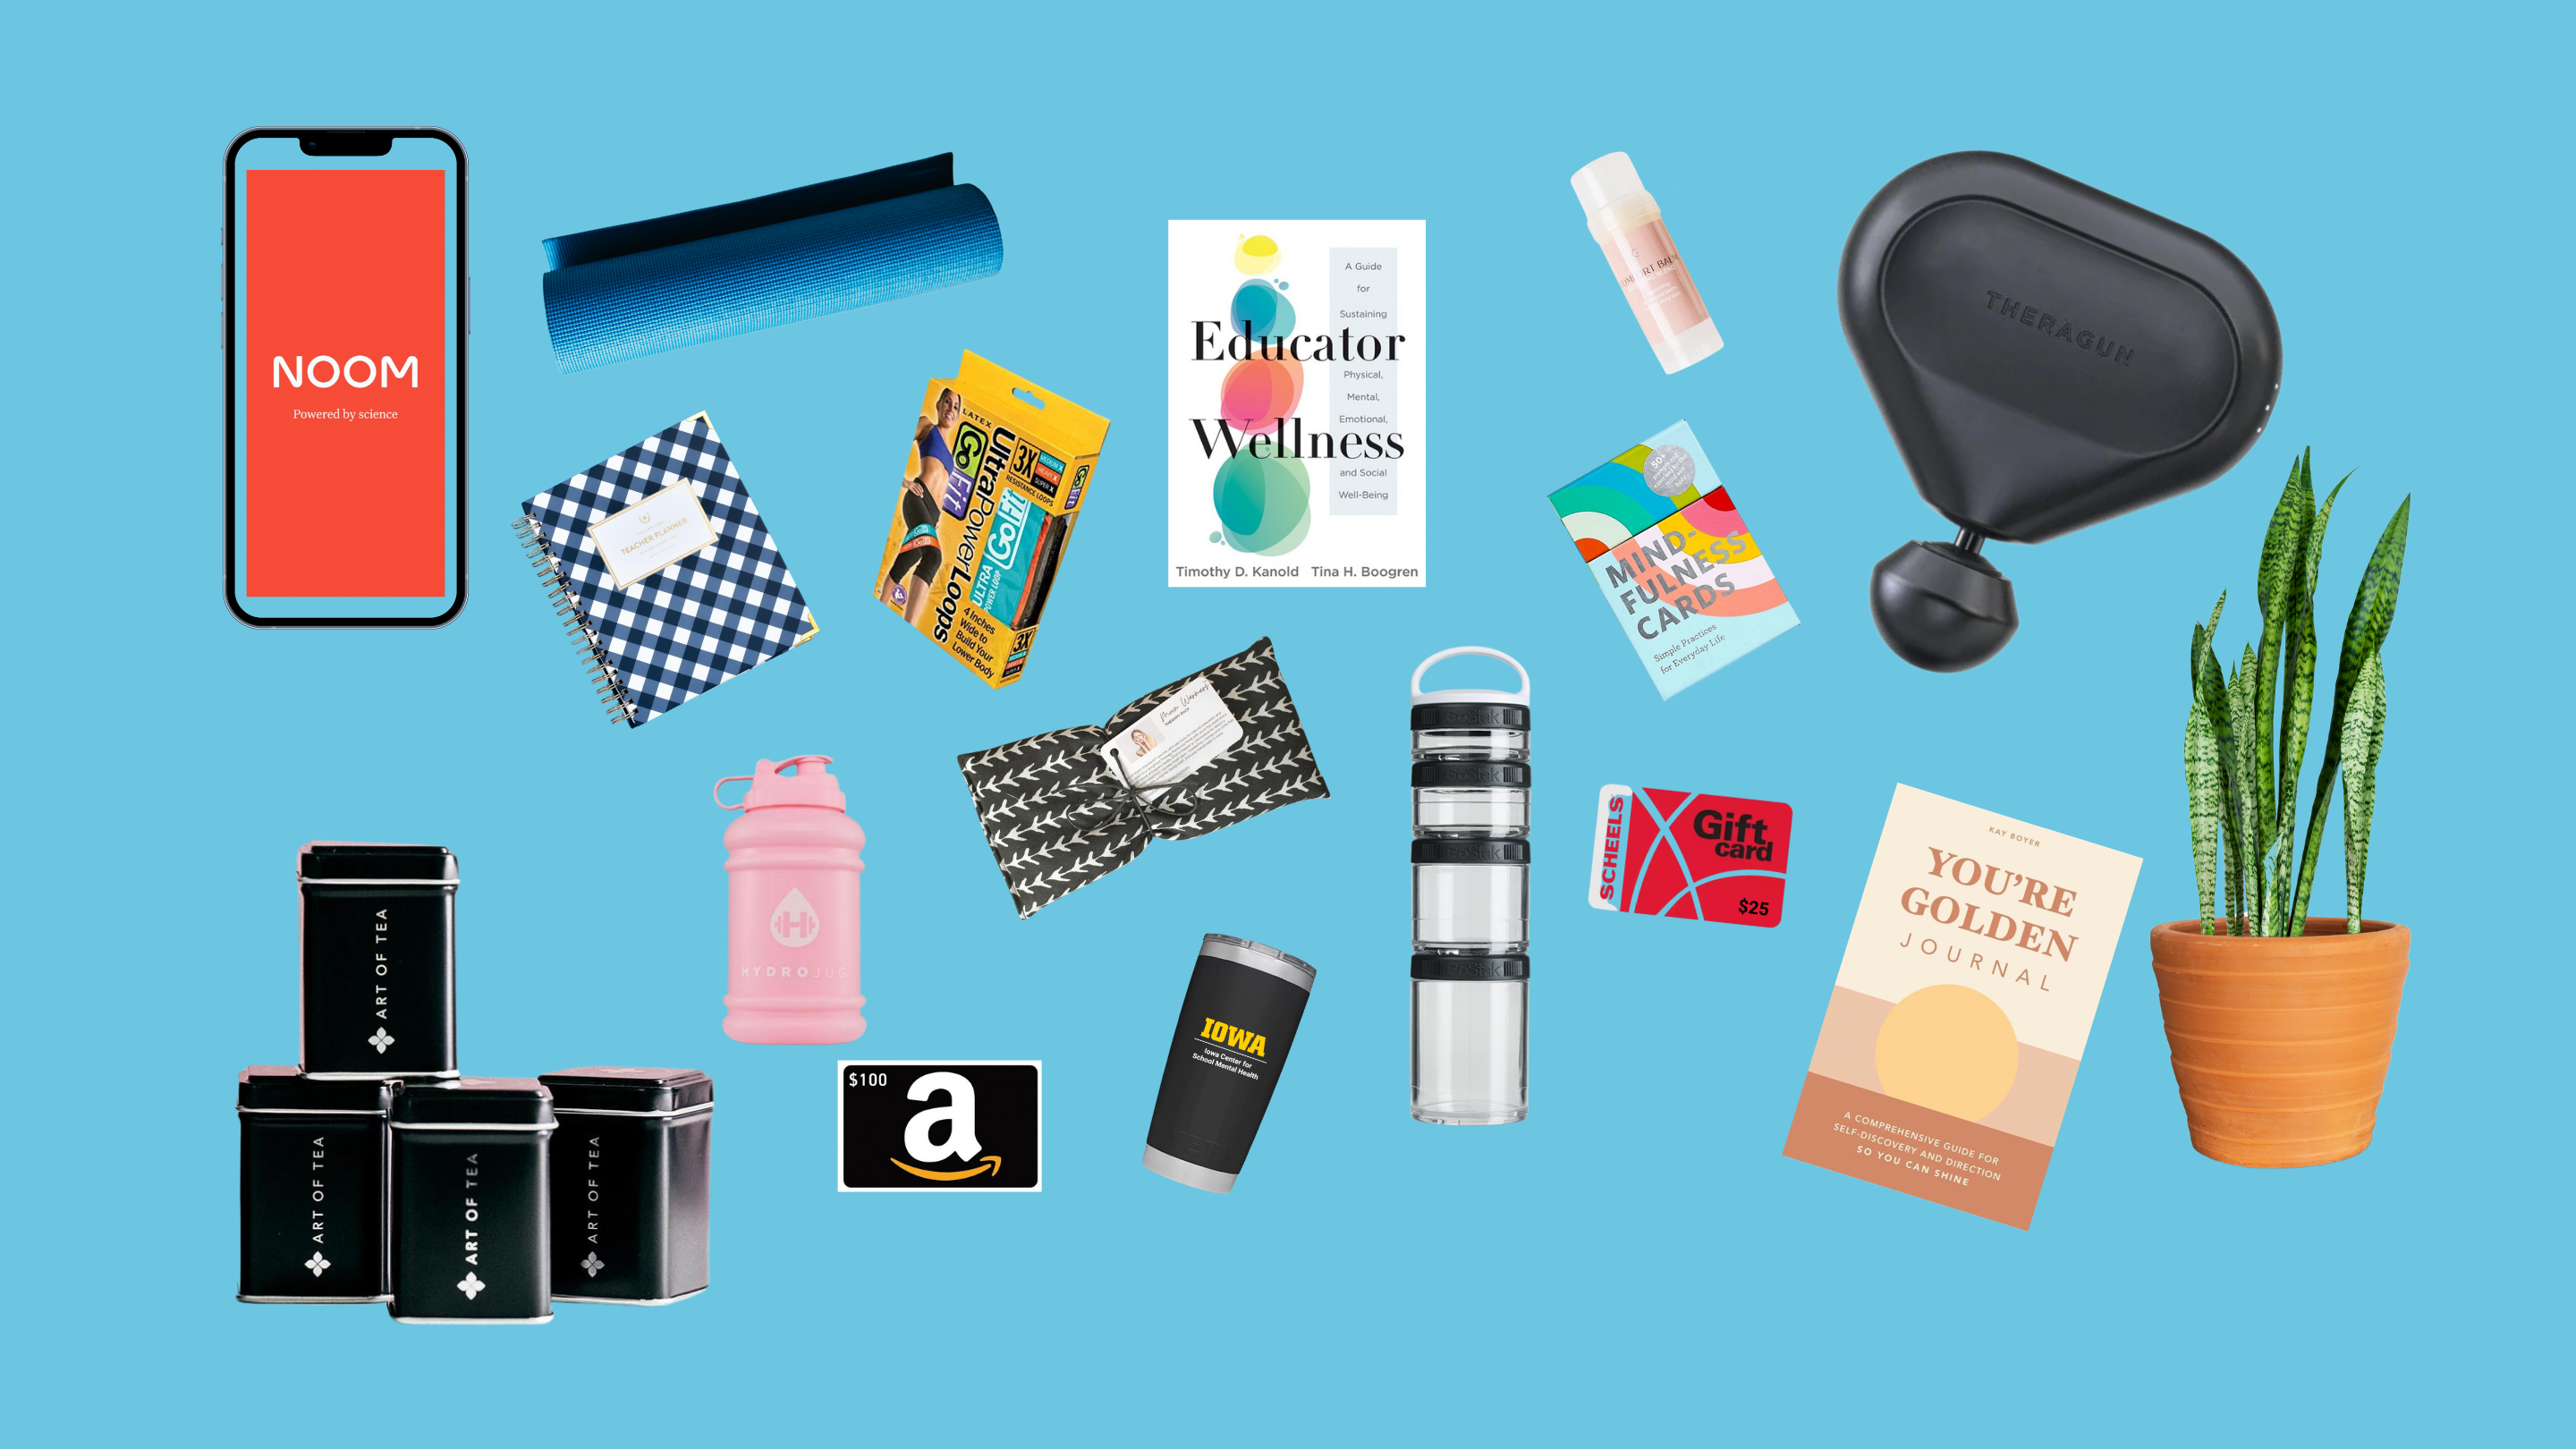 Items available to win through the Educator Wellness Giveaway